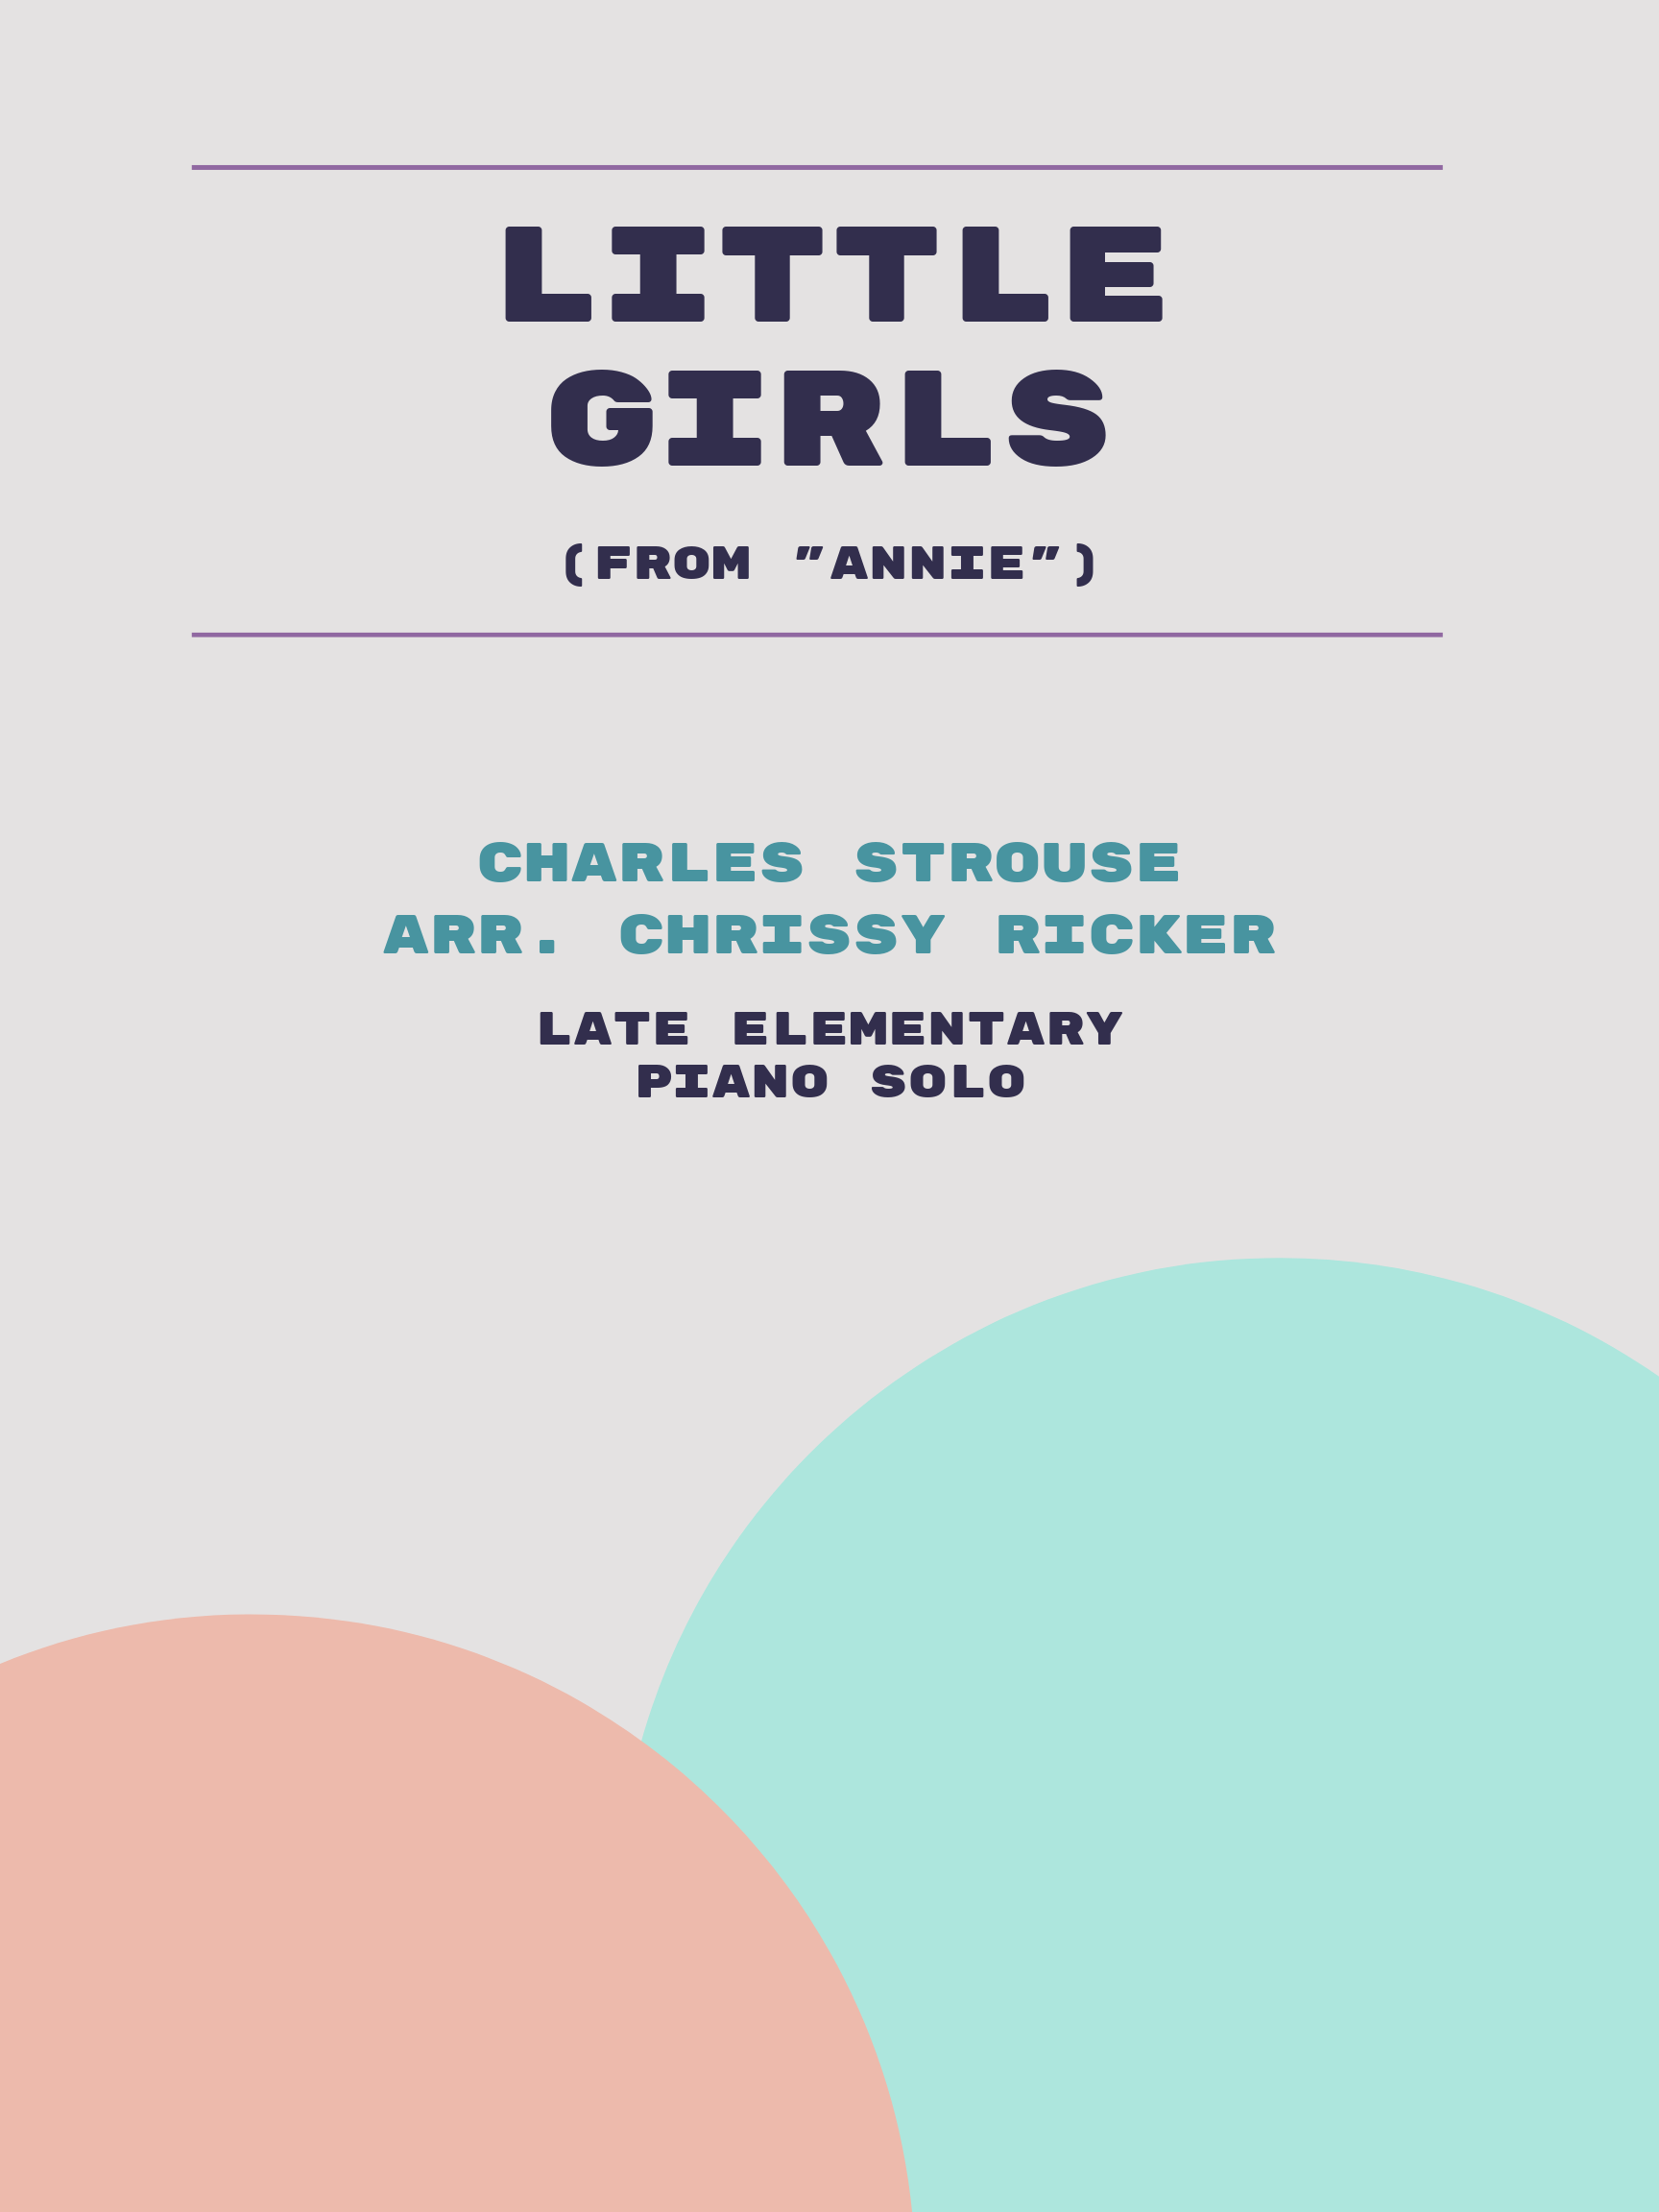 Little Girls by Charles Strouse